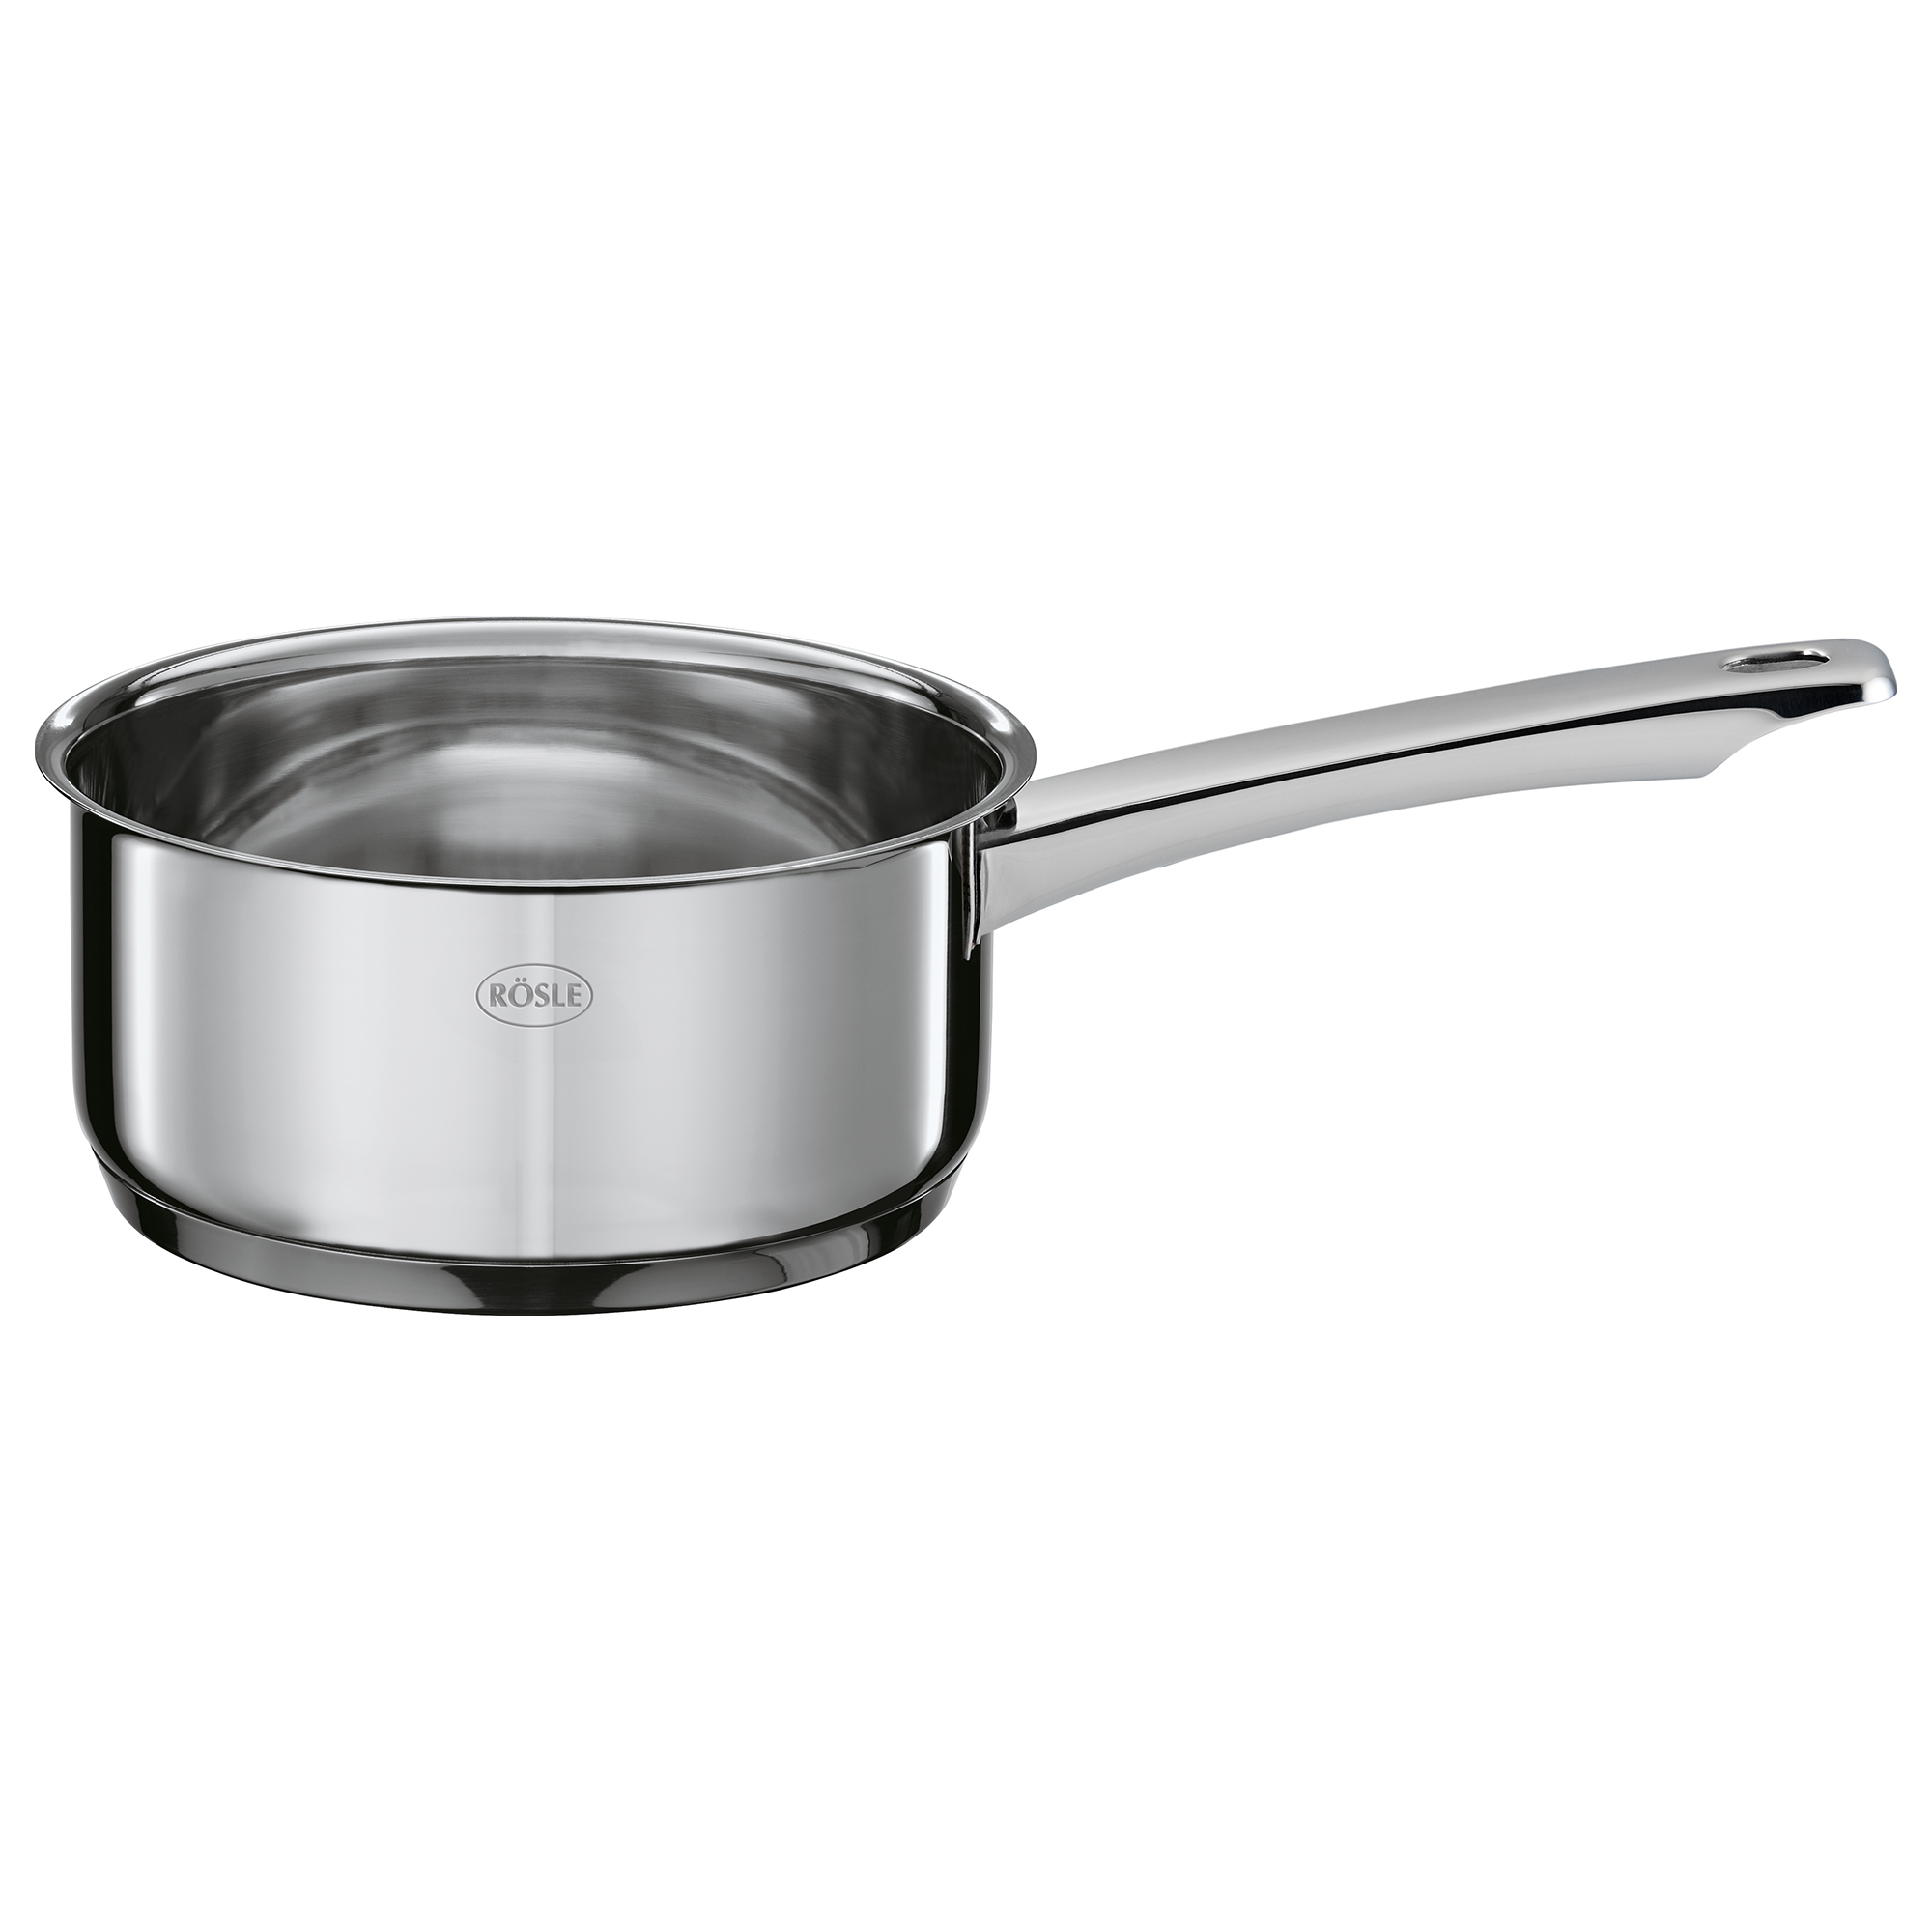 Sauce Pan Moments Ø 16 cm|6.3 in.